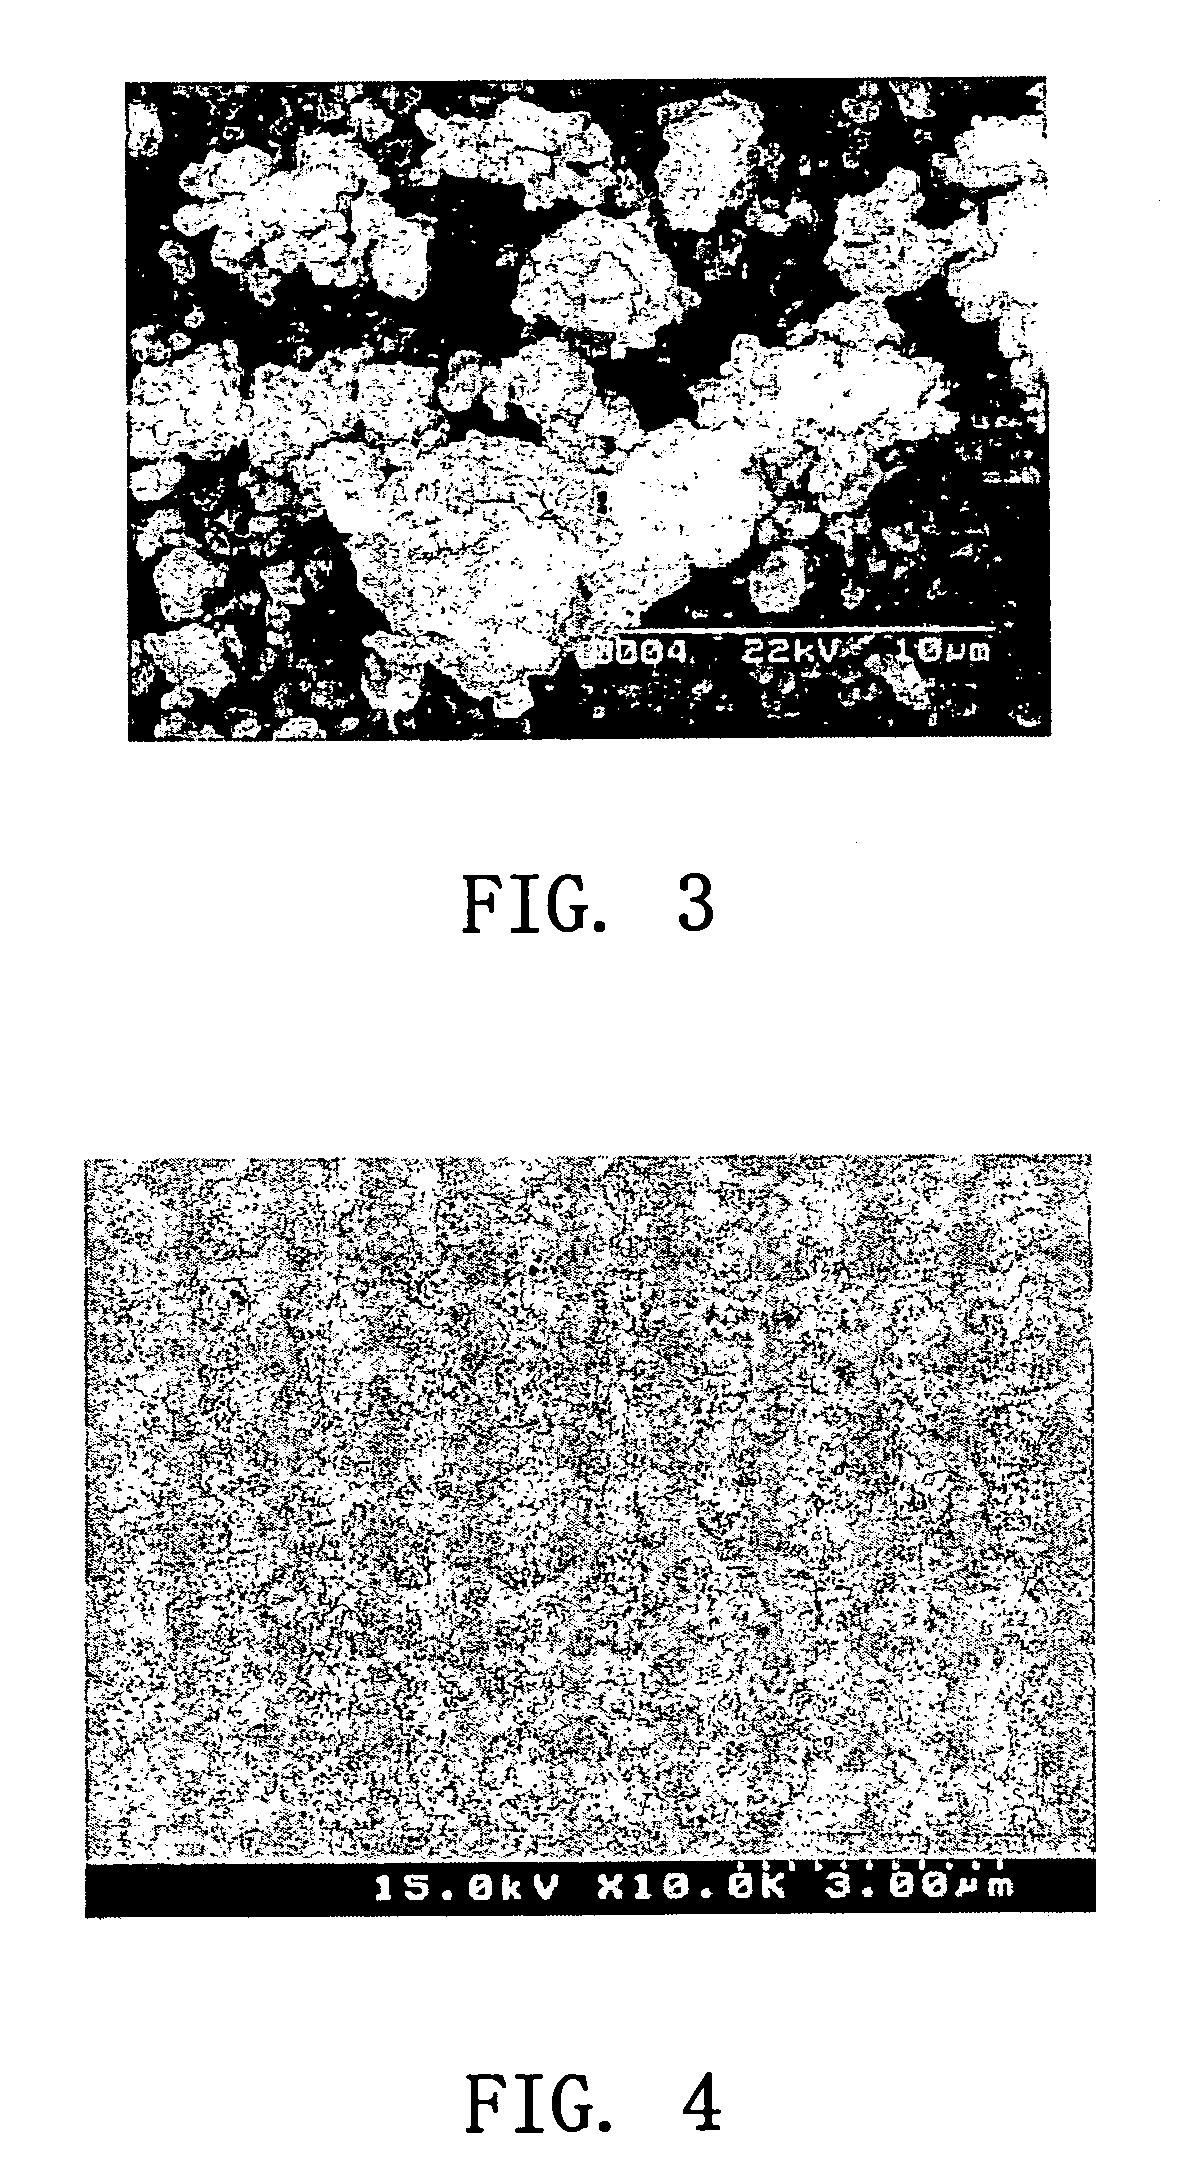 Method of fabricating ultra-fine cermet alloys with homogeneous solid grain structure